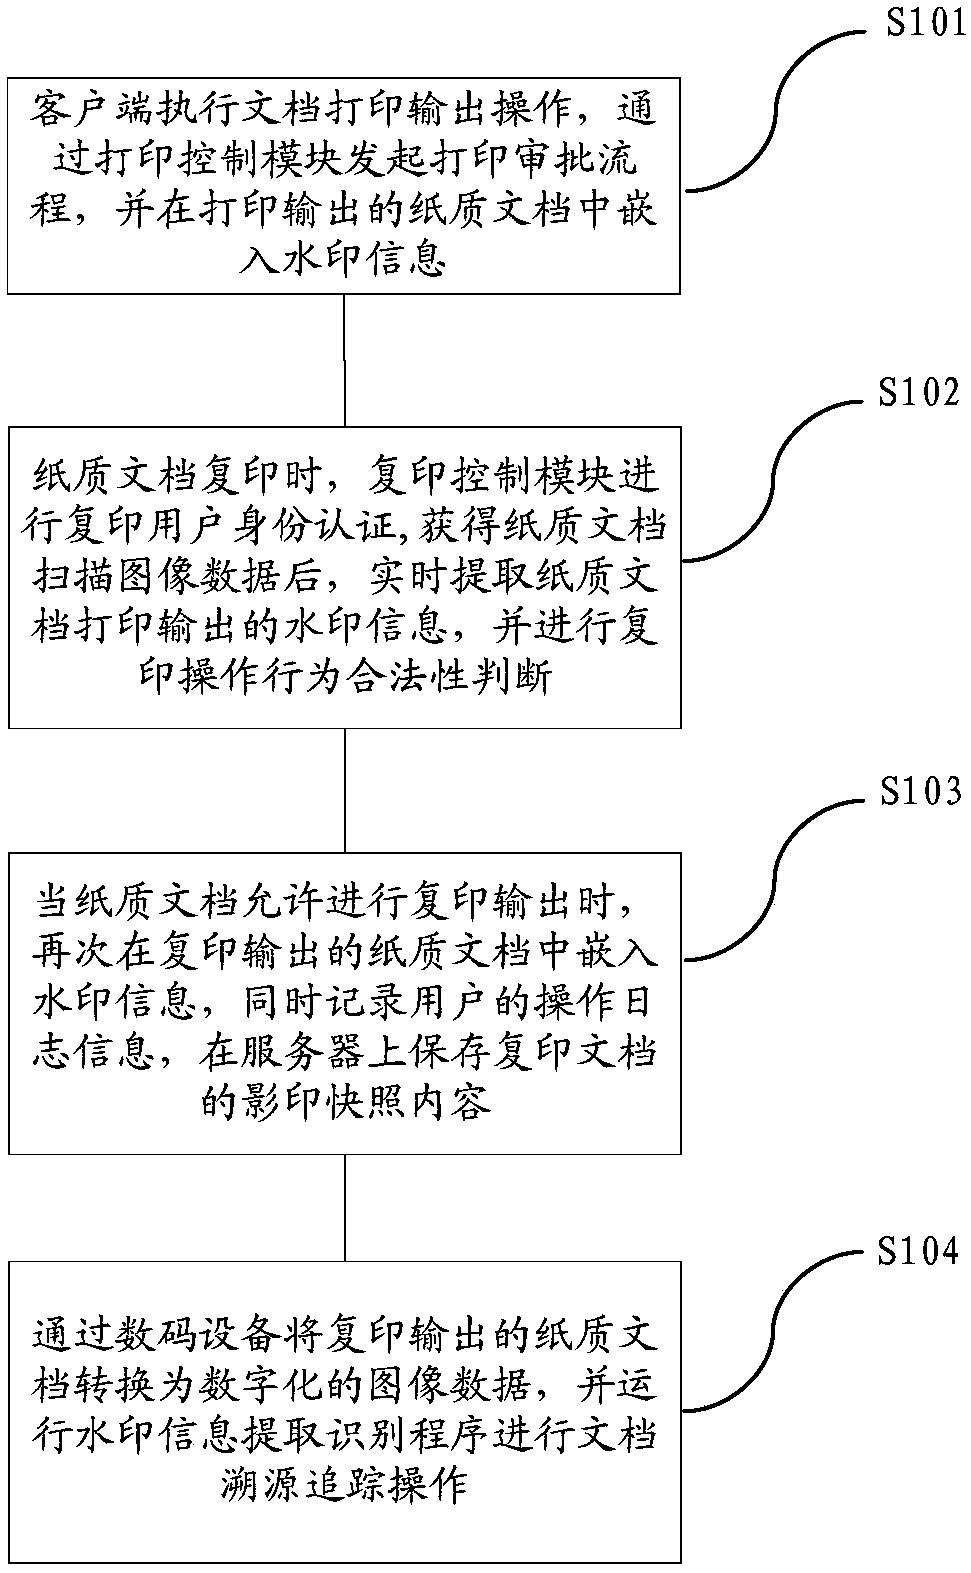 Method and device for safety control and source-tracing tracking of paper document